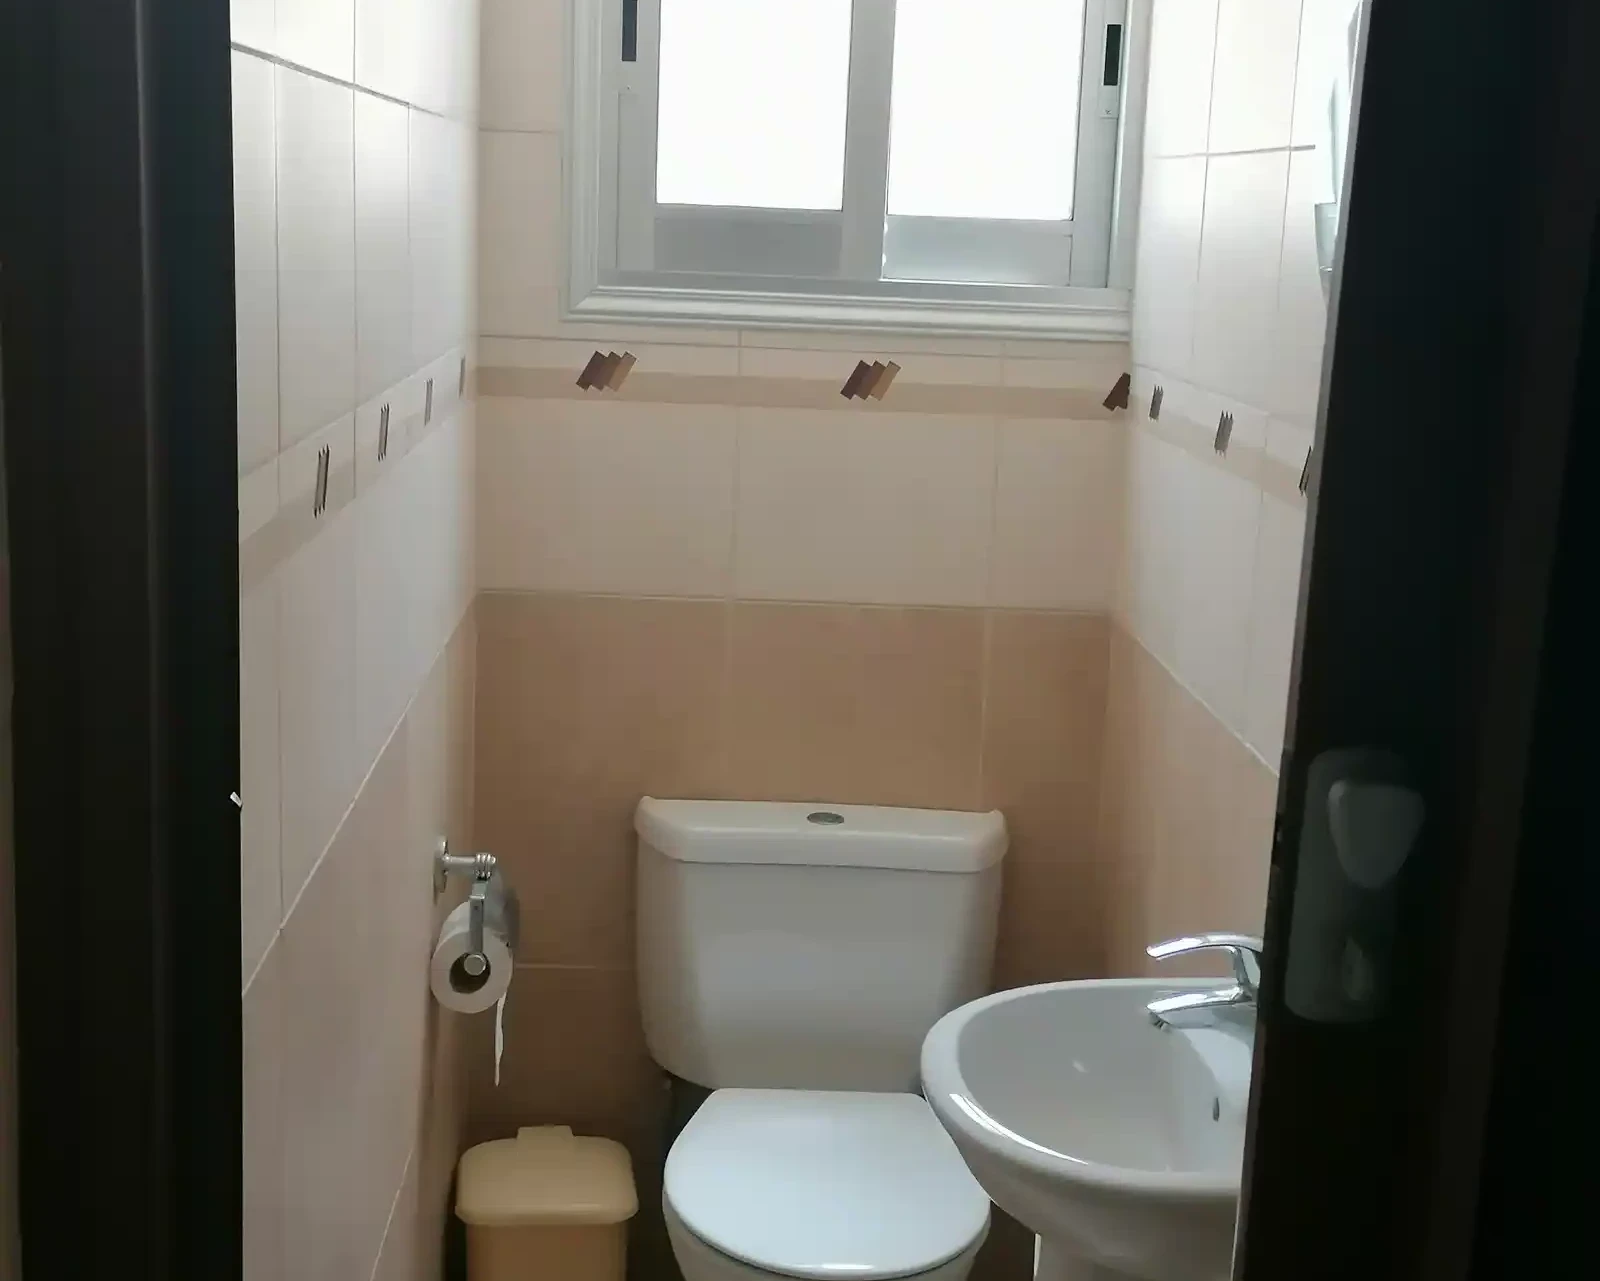 3-bedroom apartment to rent €1.100, image 1